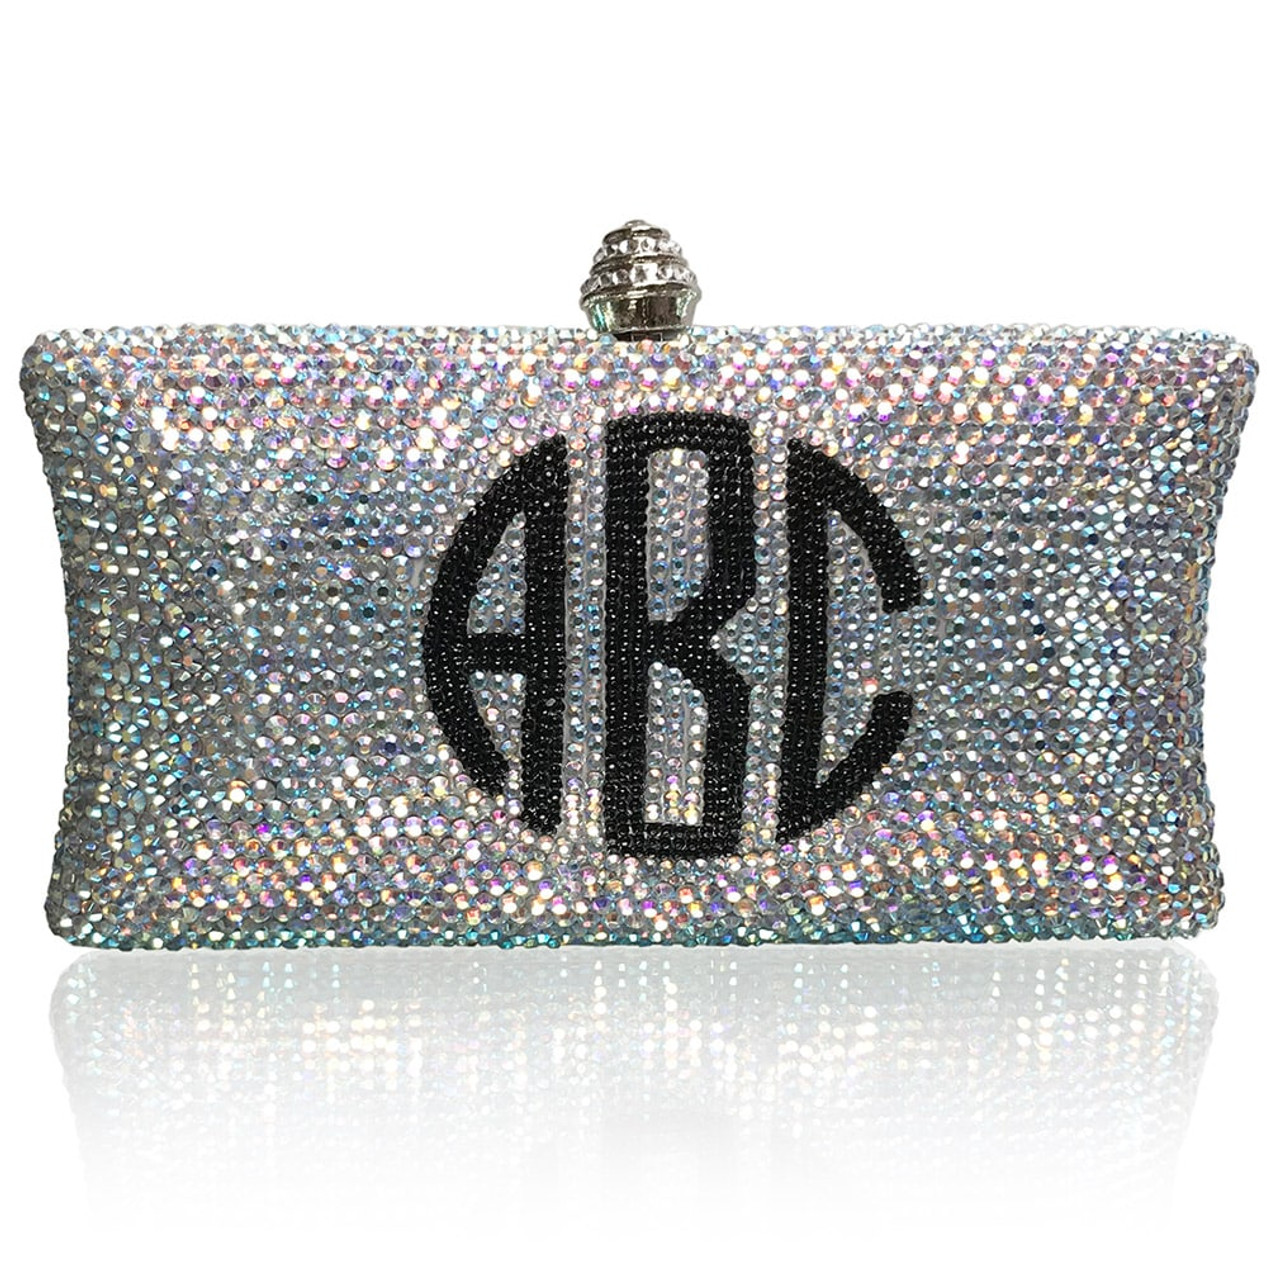 Fashionable New Arrival Large Capacity Monogram Clutch Bag With Color  Collision Design For Women